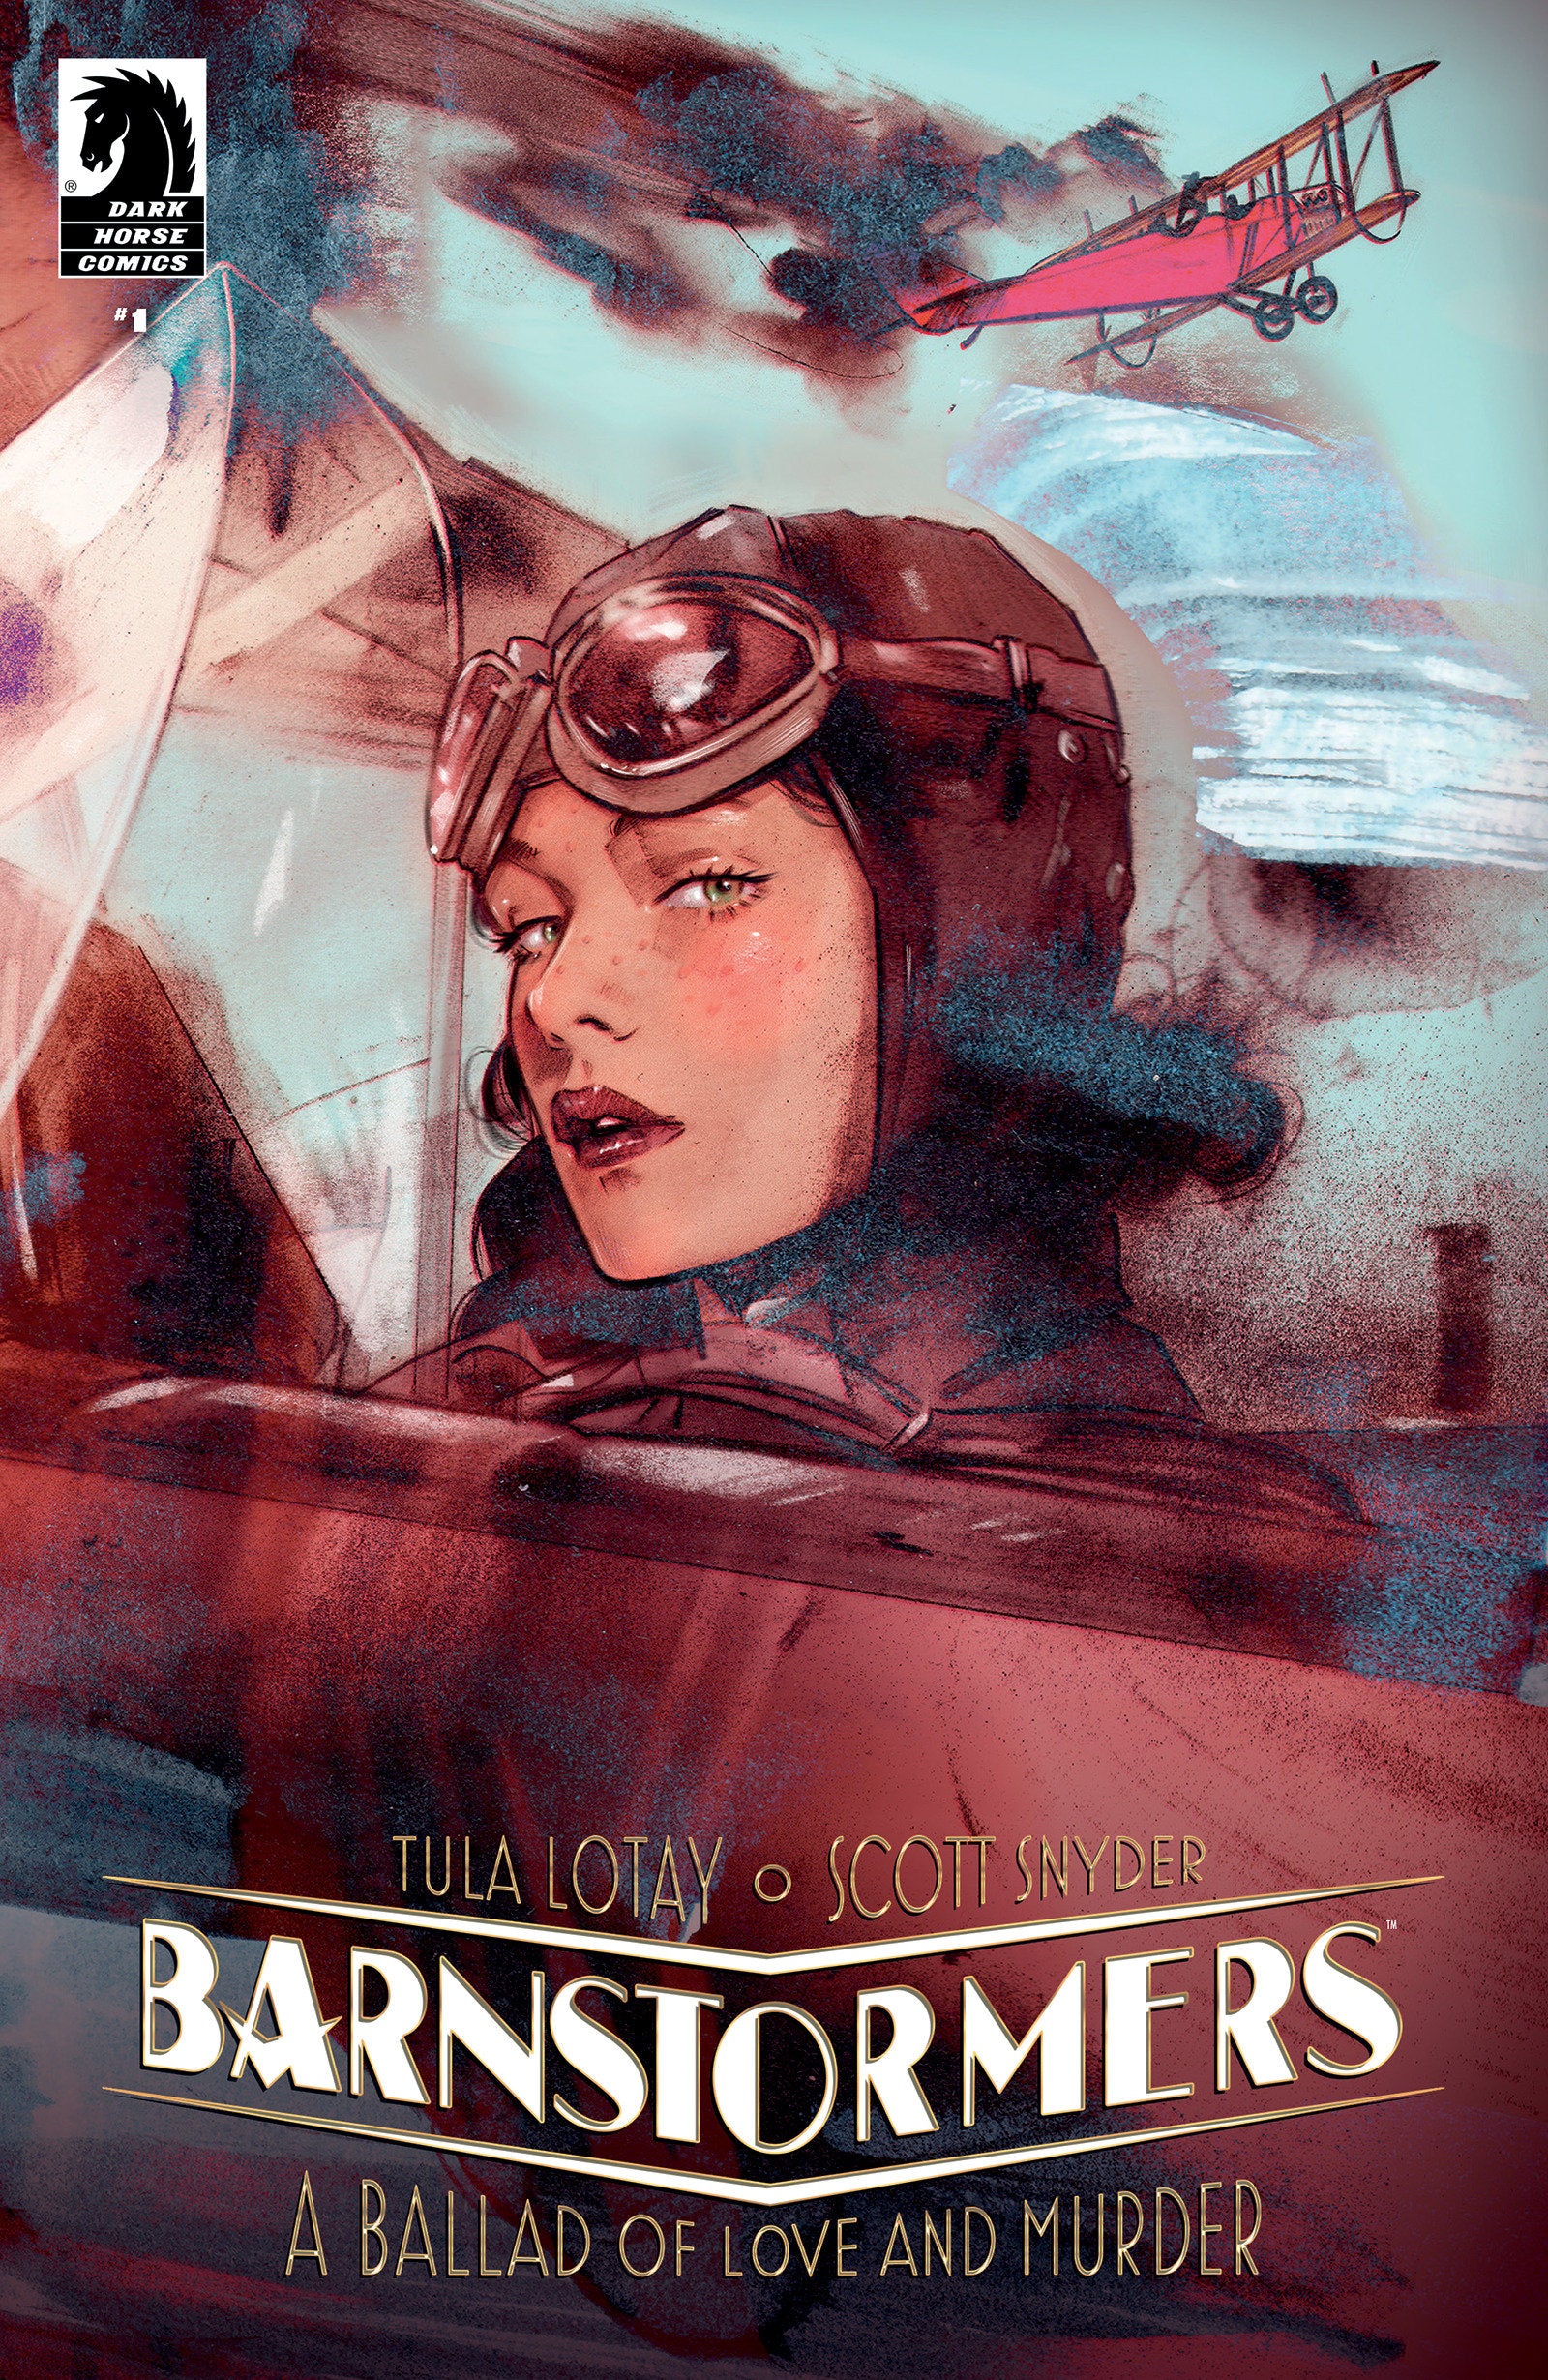 Barnstormers #1 (Cover A) (Tula Lotay) | Game Master's Emporium (The New GME)